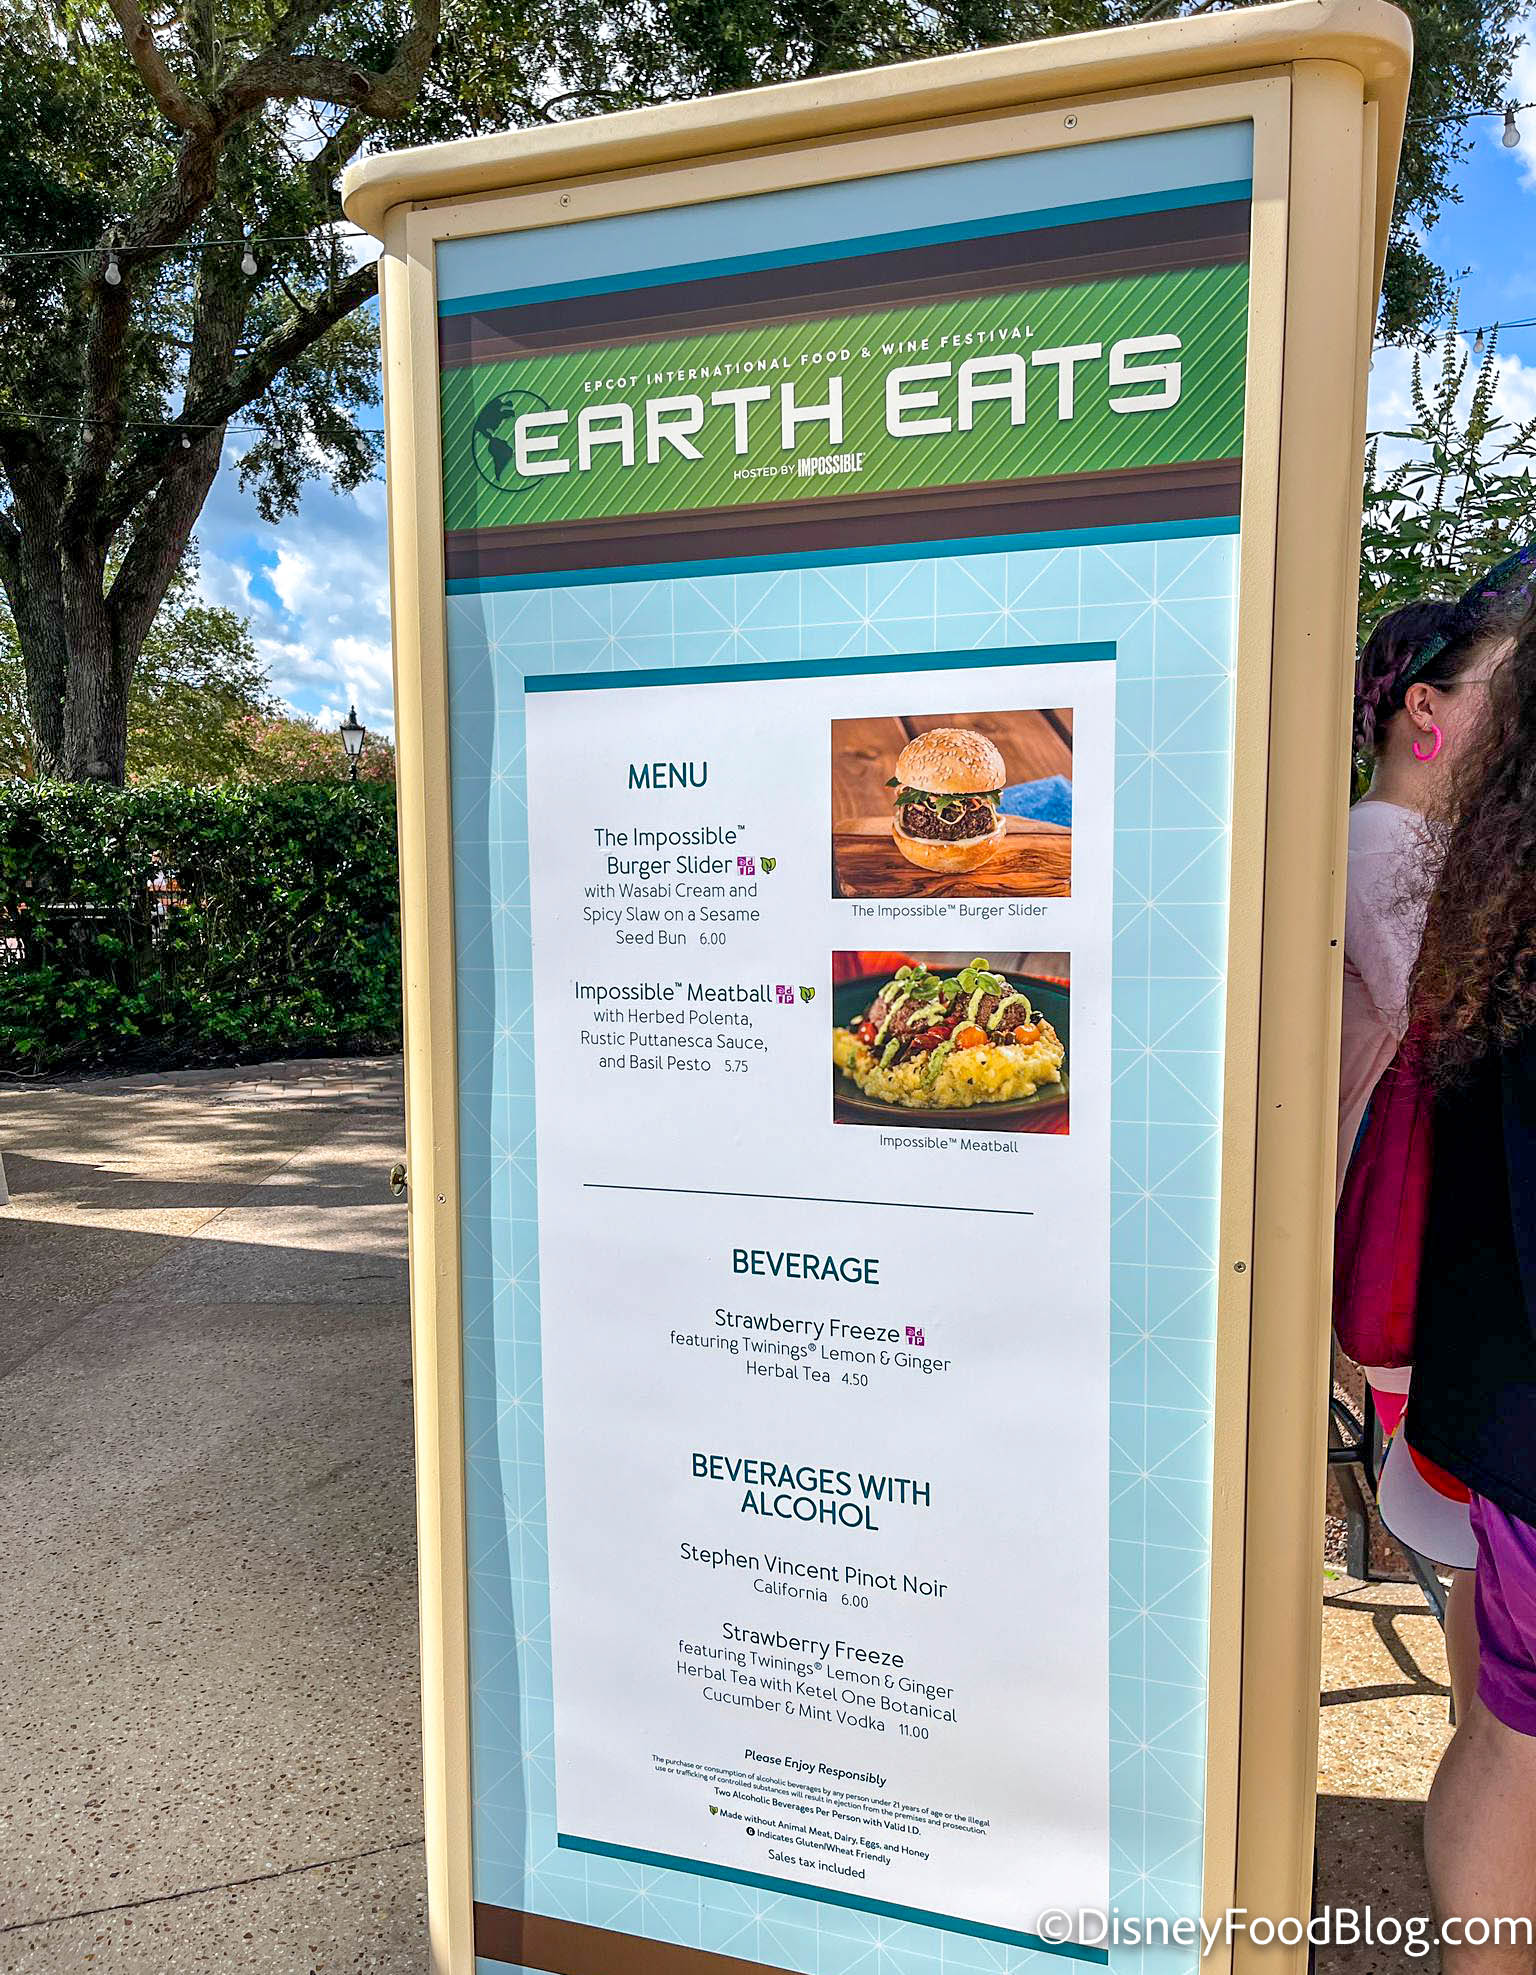 Food & Wine Festival Menus With PRICES Are Up in EPCOT Disney by Mark